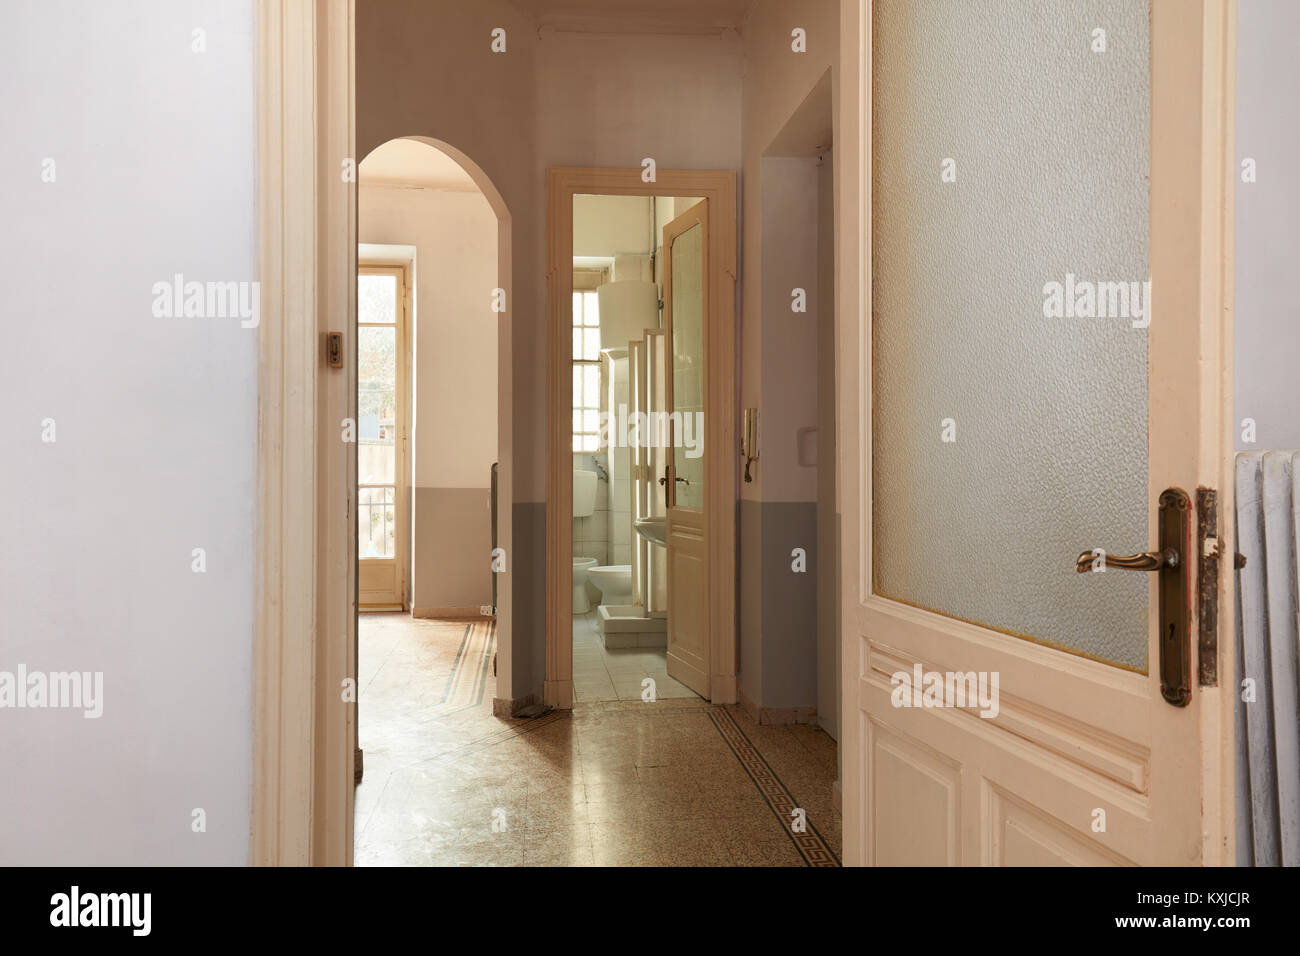 Old apartment interior view with open wooden door and tiled floor Stock Photo